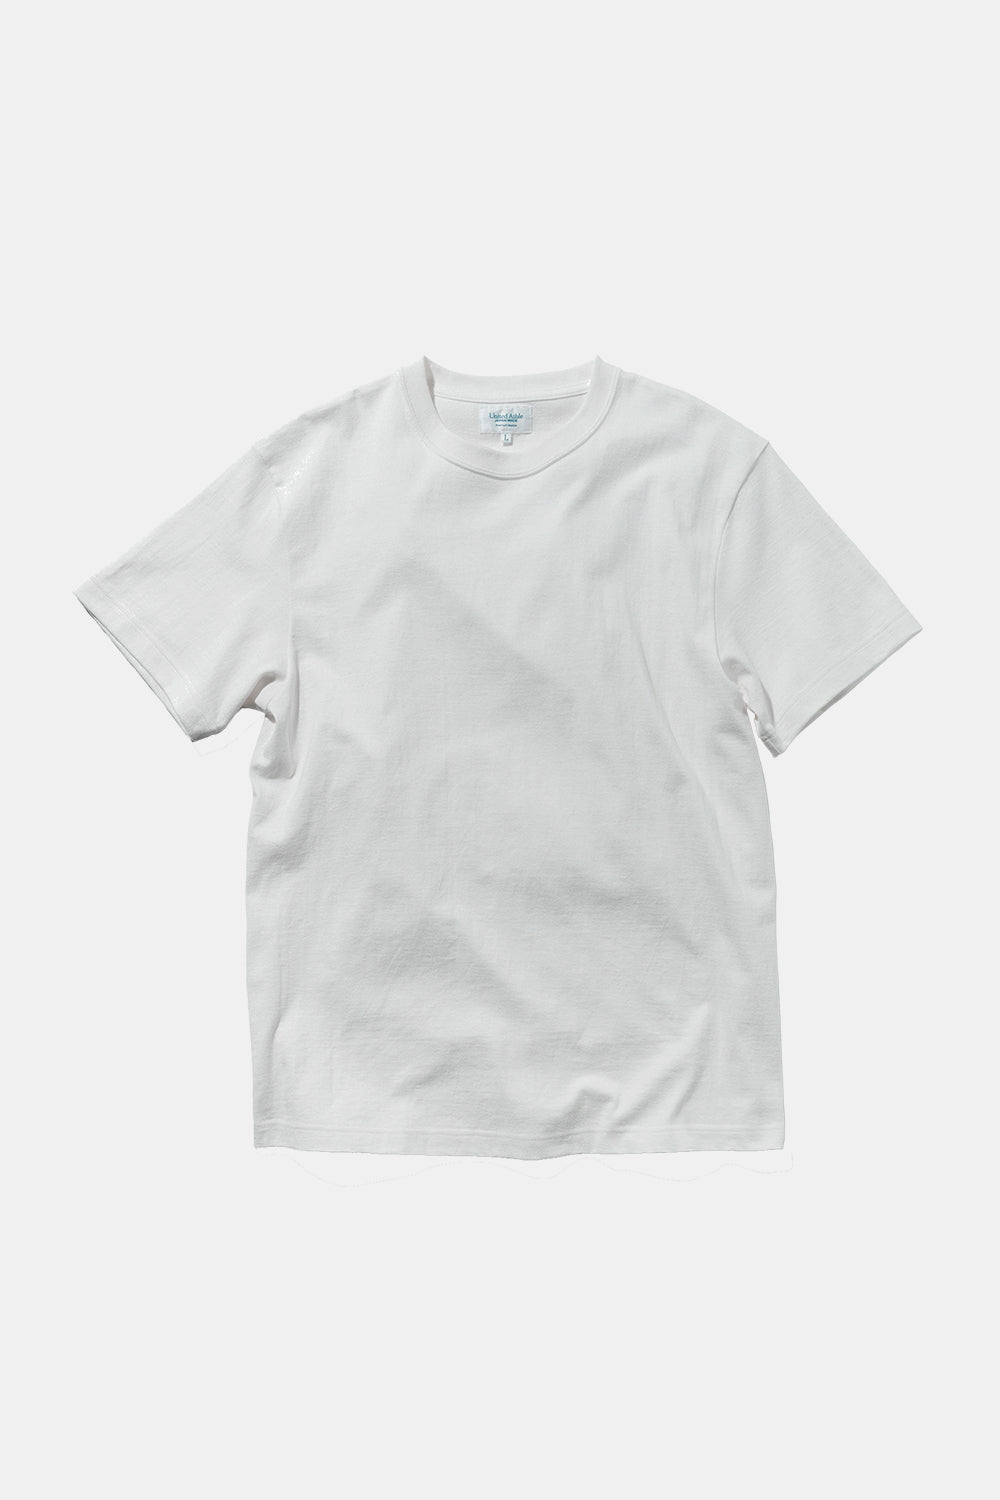 United Athle Japan Made Standard Fit Short Sleeve T-shirt (White)